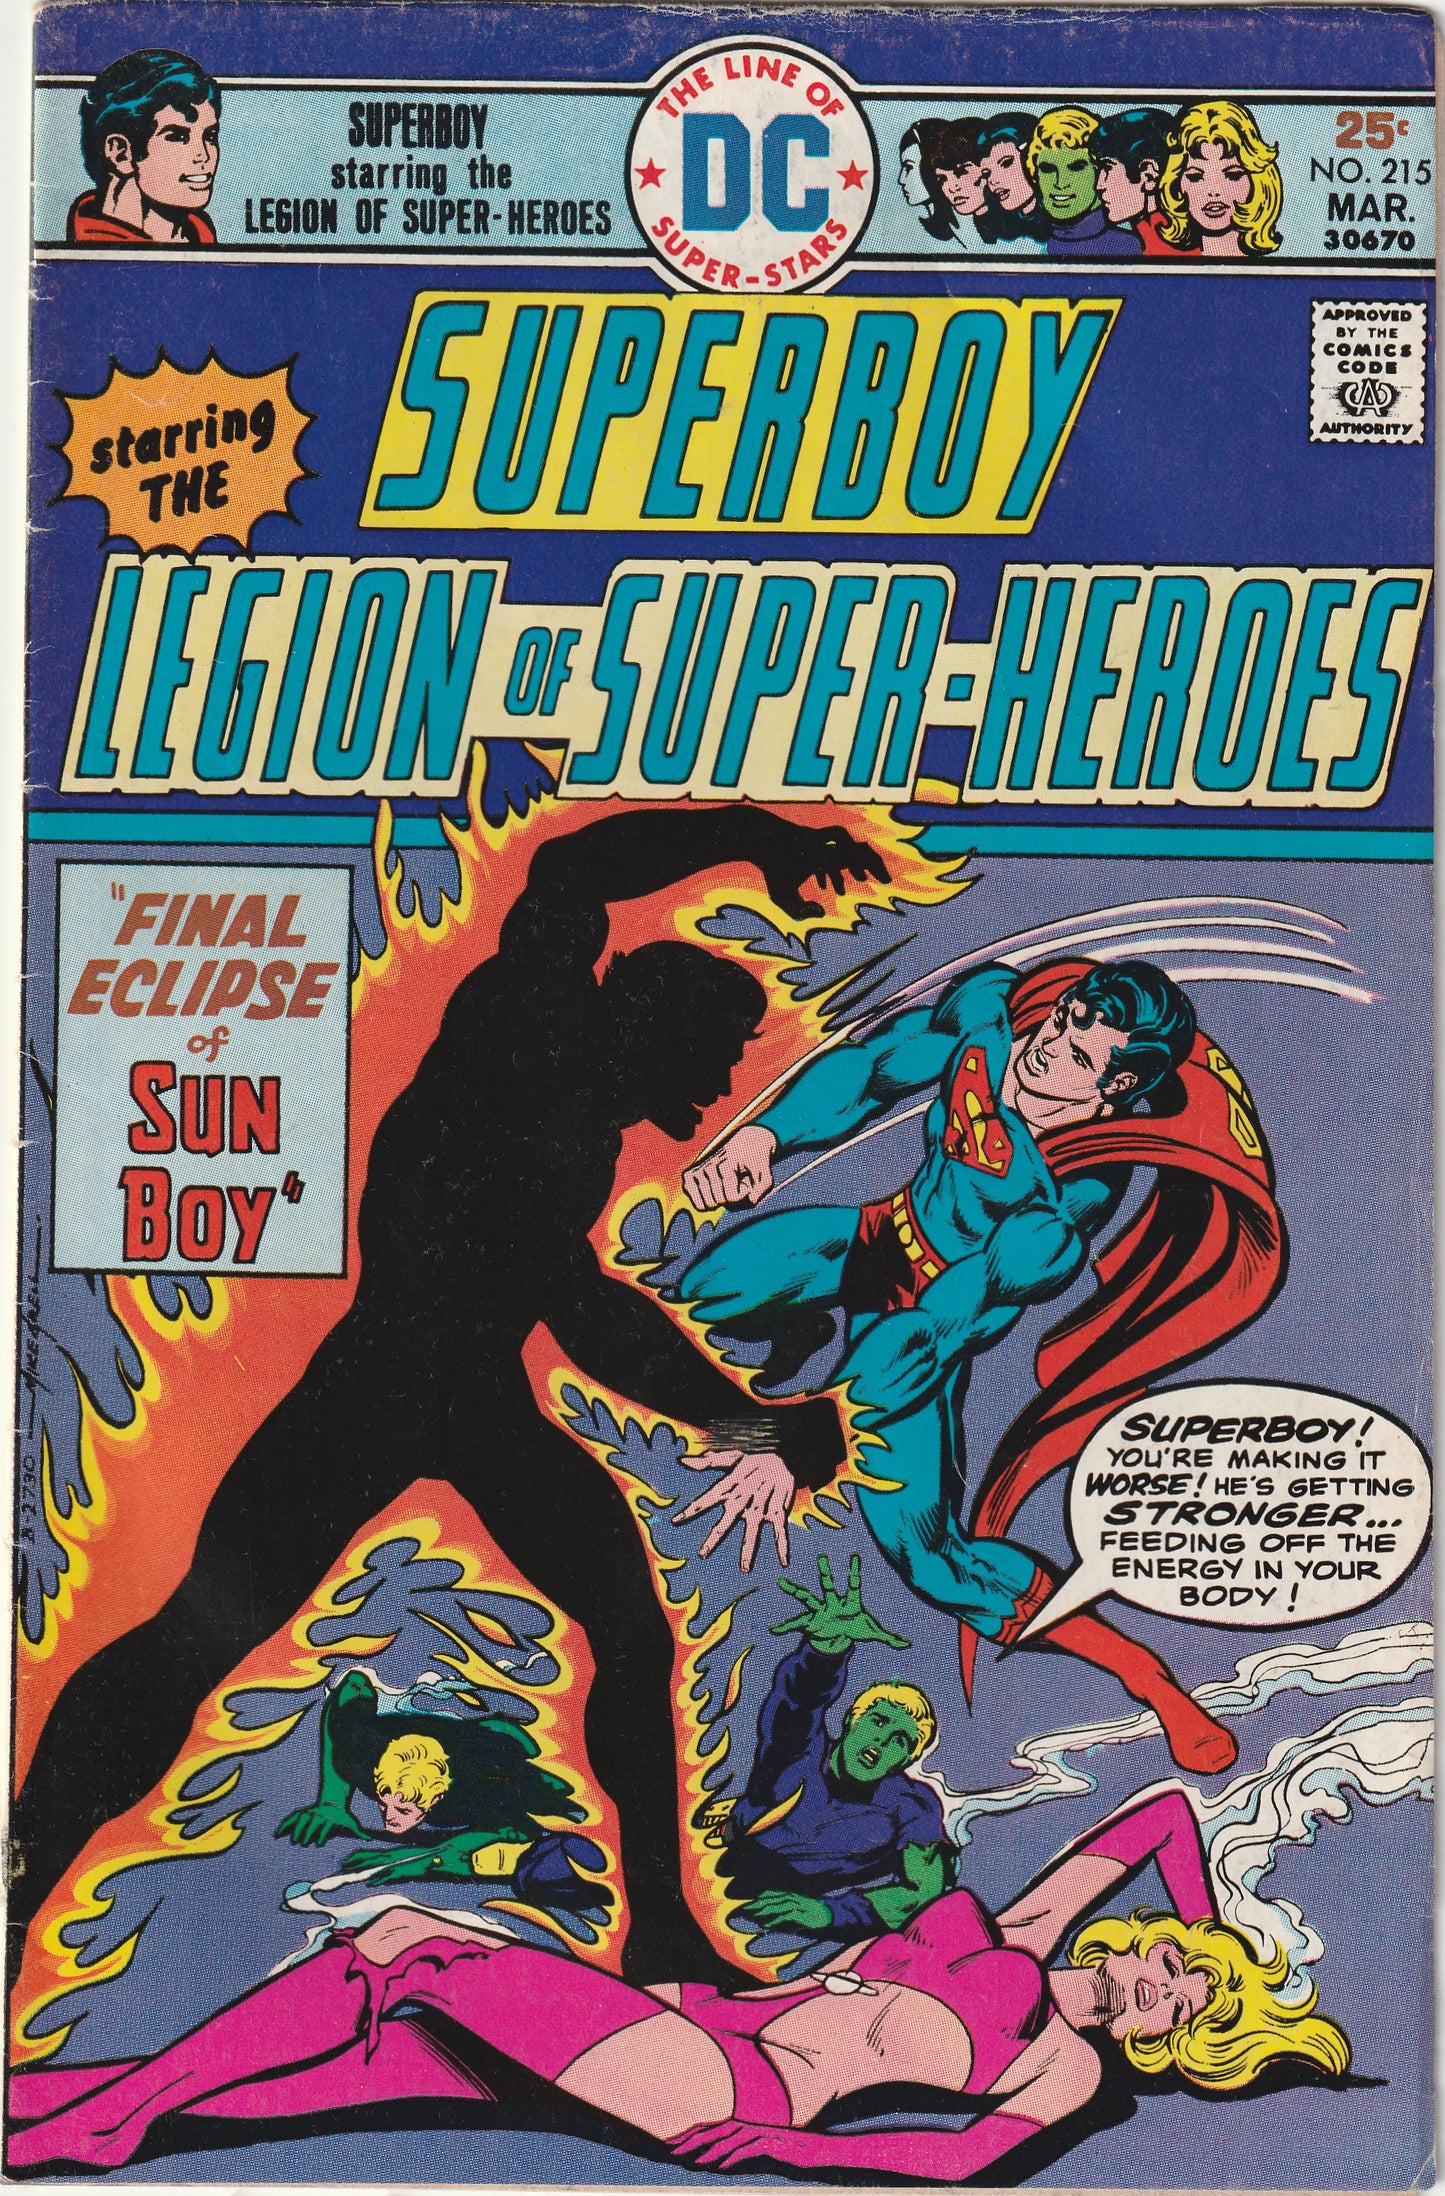 Superboy #215 (1976) - Starring the Legion of Super-Heroes